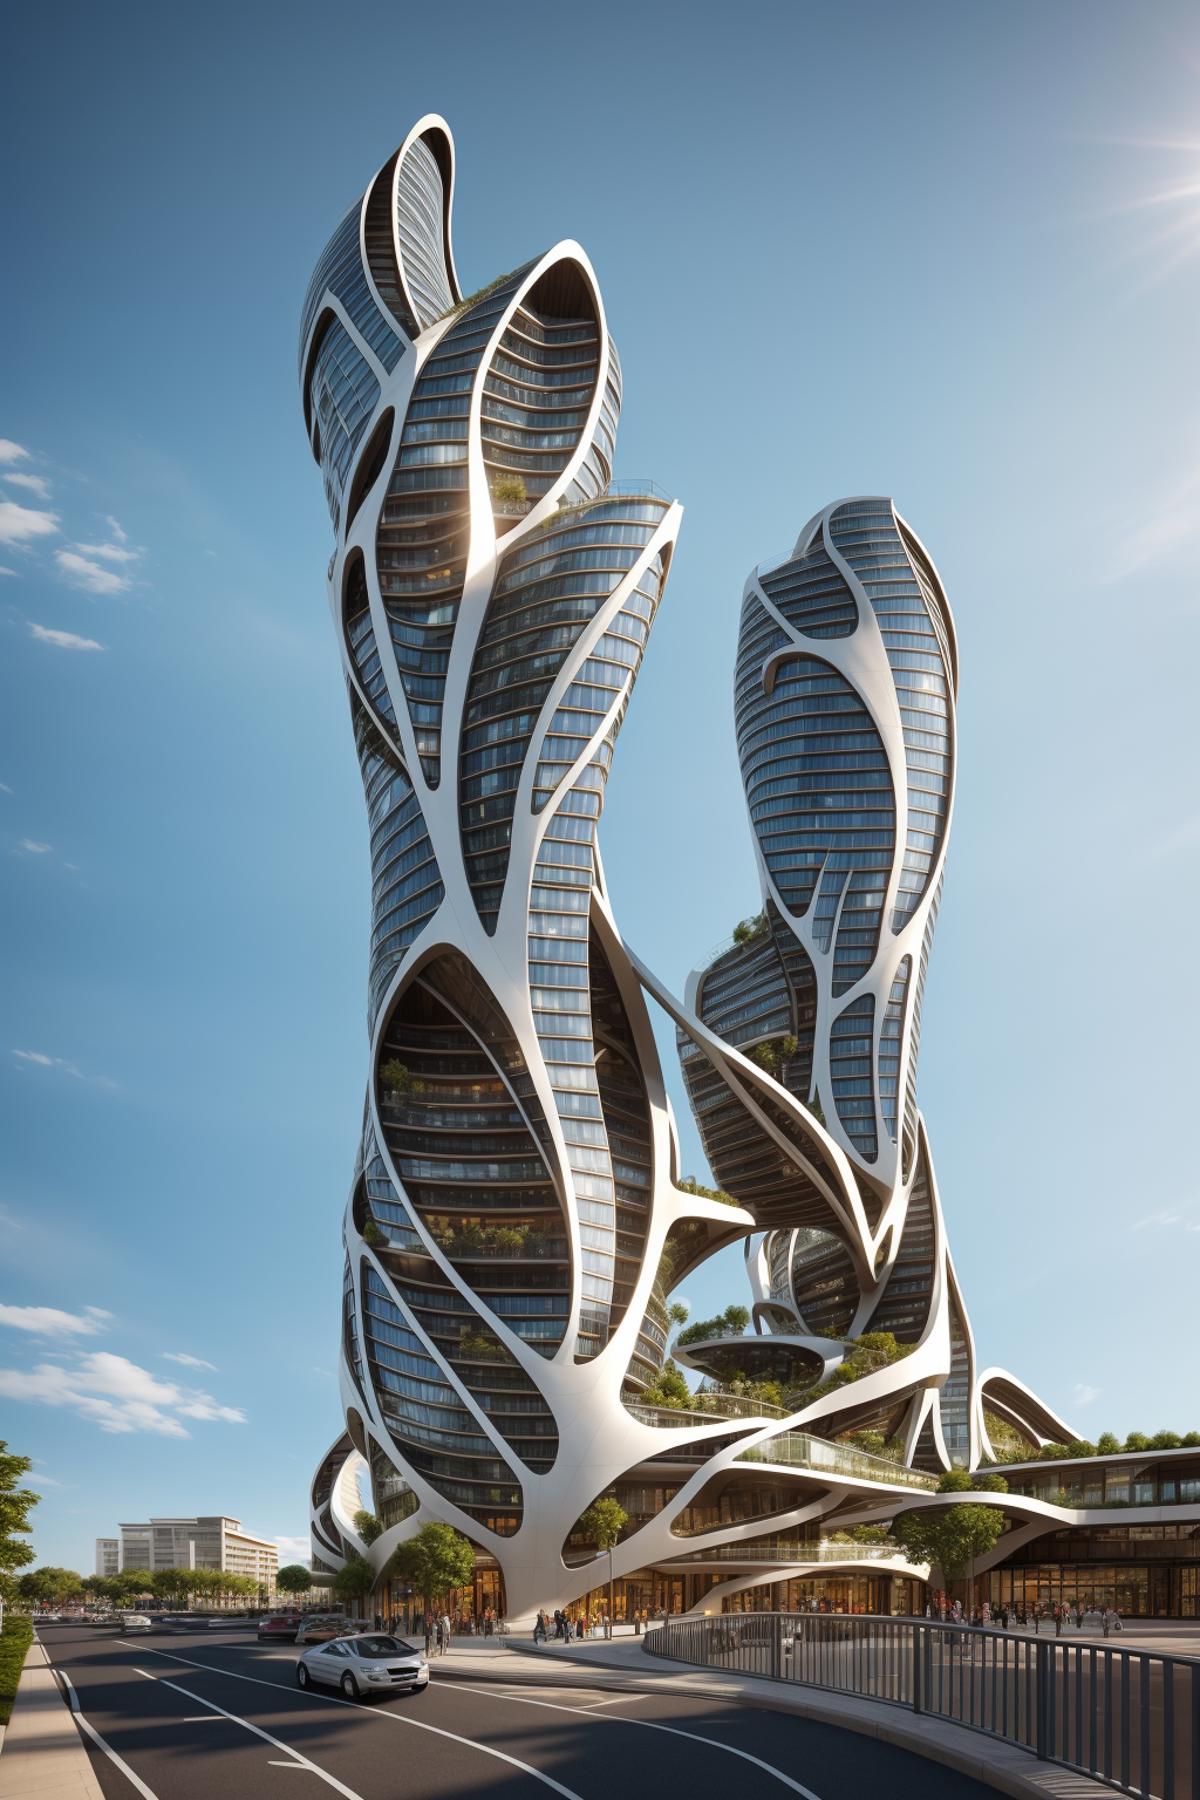 A Futuristic Cityscape of Tall, Curved Buildings with Balconies and Trees